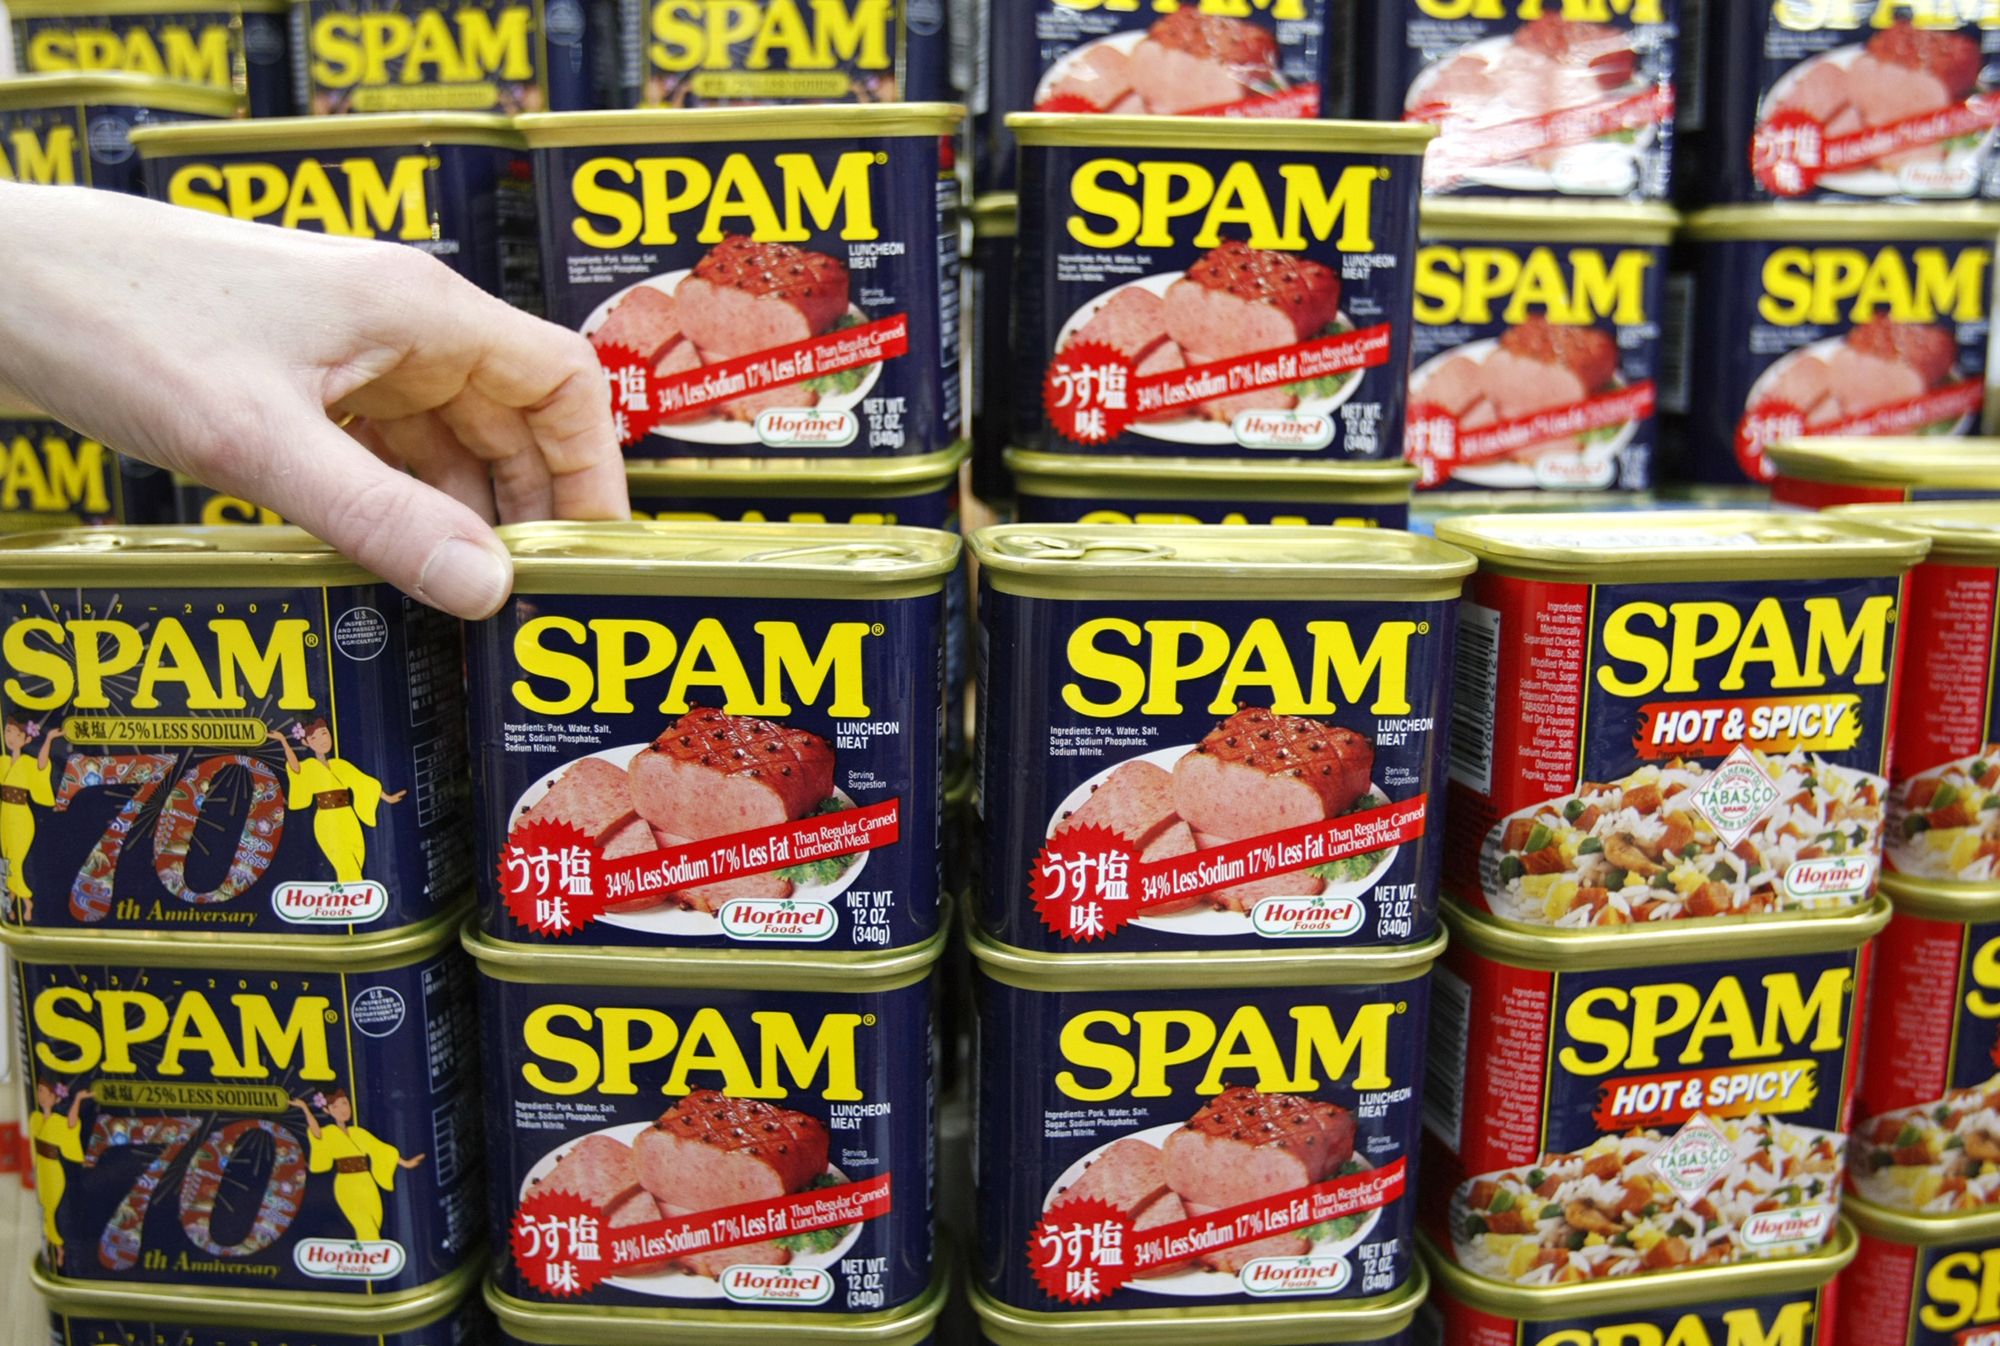 Every Flavor Of Spam, Ranked From The Worst To The Best